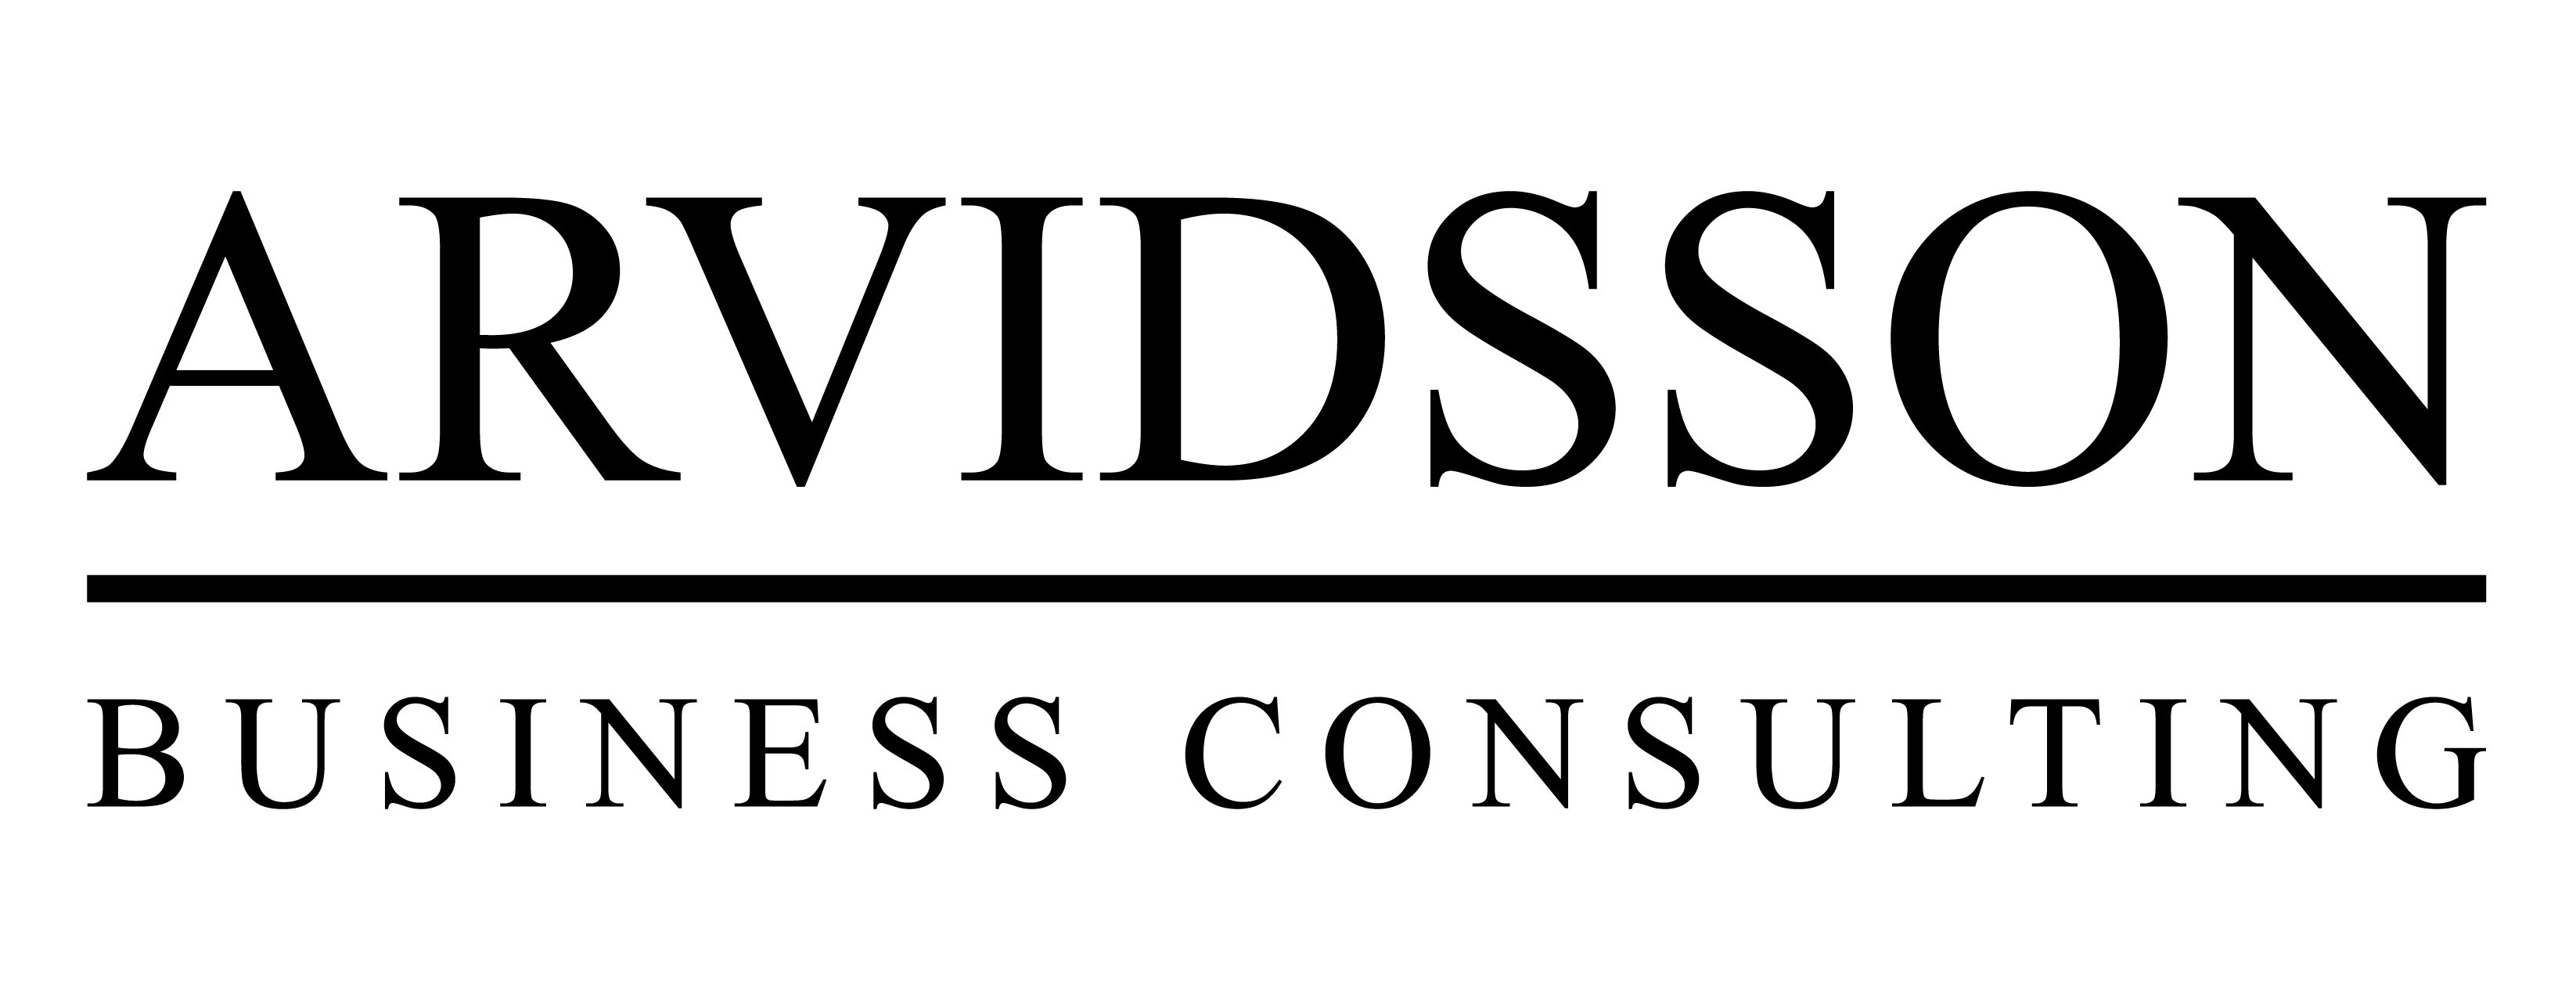 Arvidsson Business Consulting